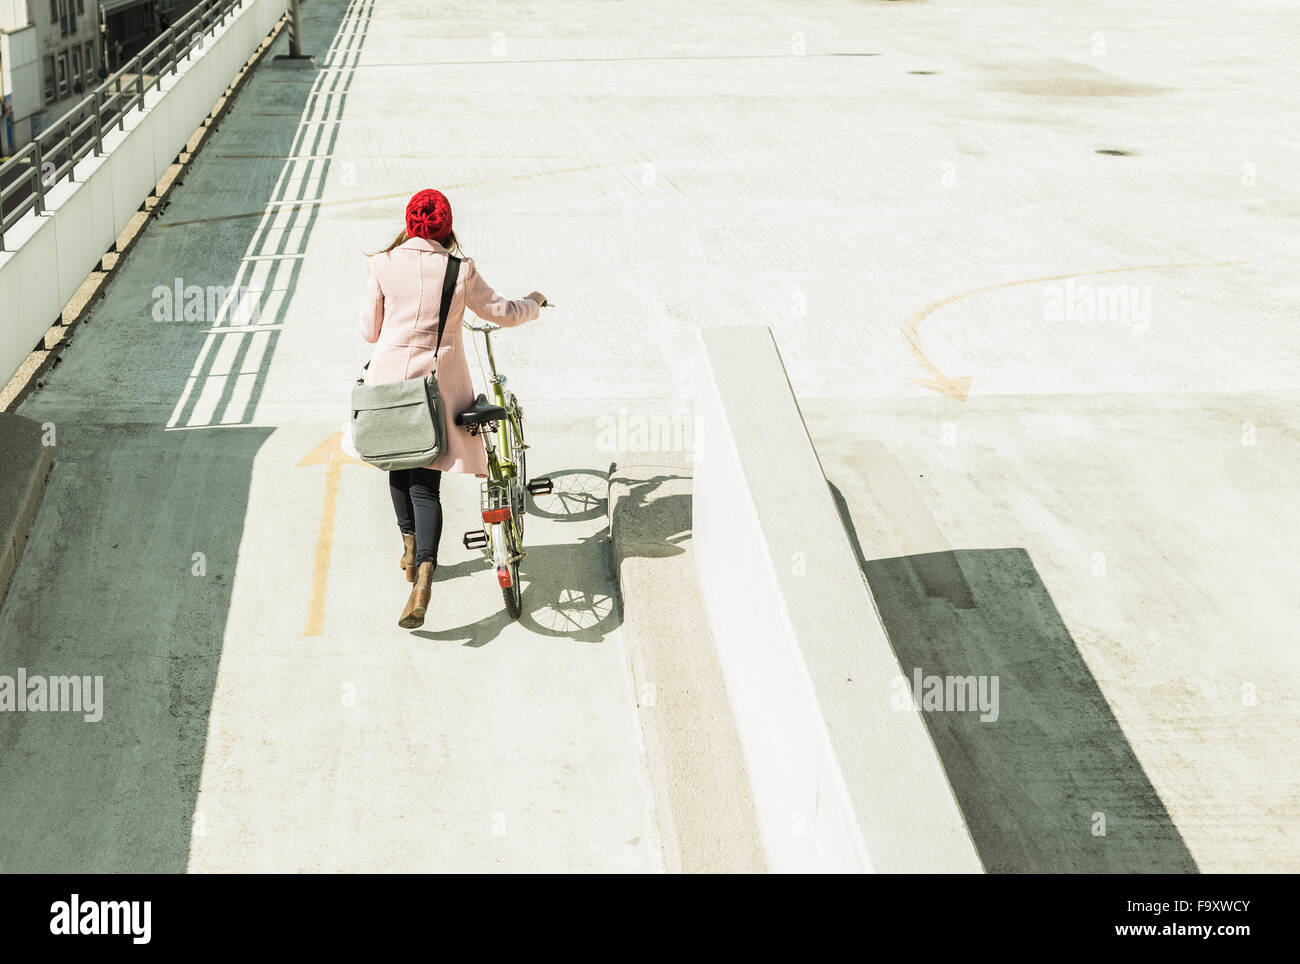 Young woman pushing bicycle on parking level Stock Photo